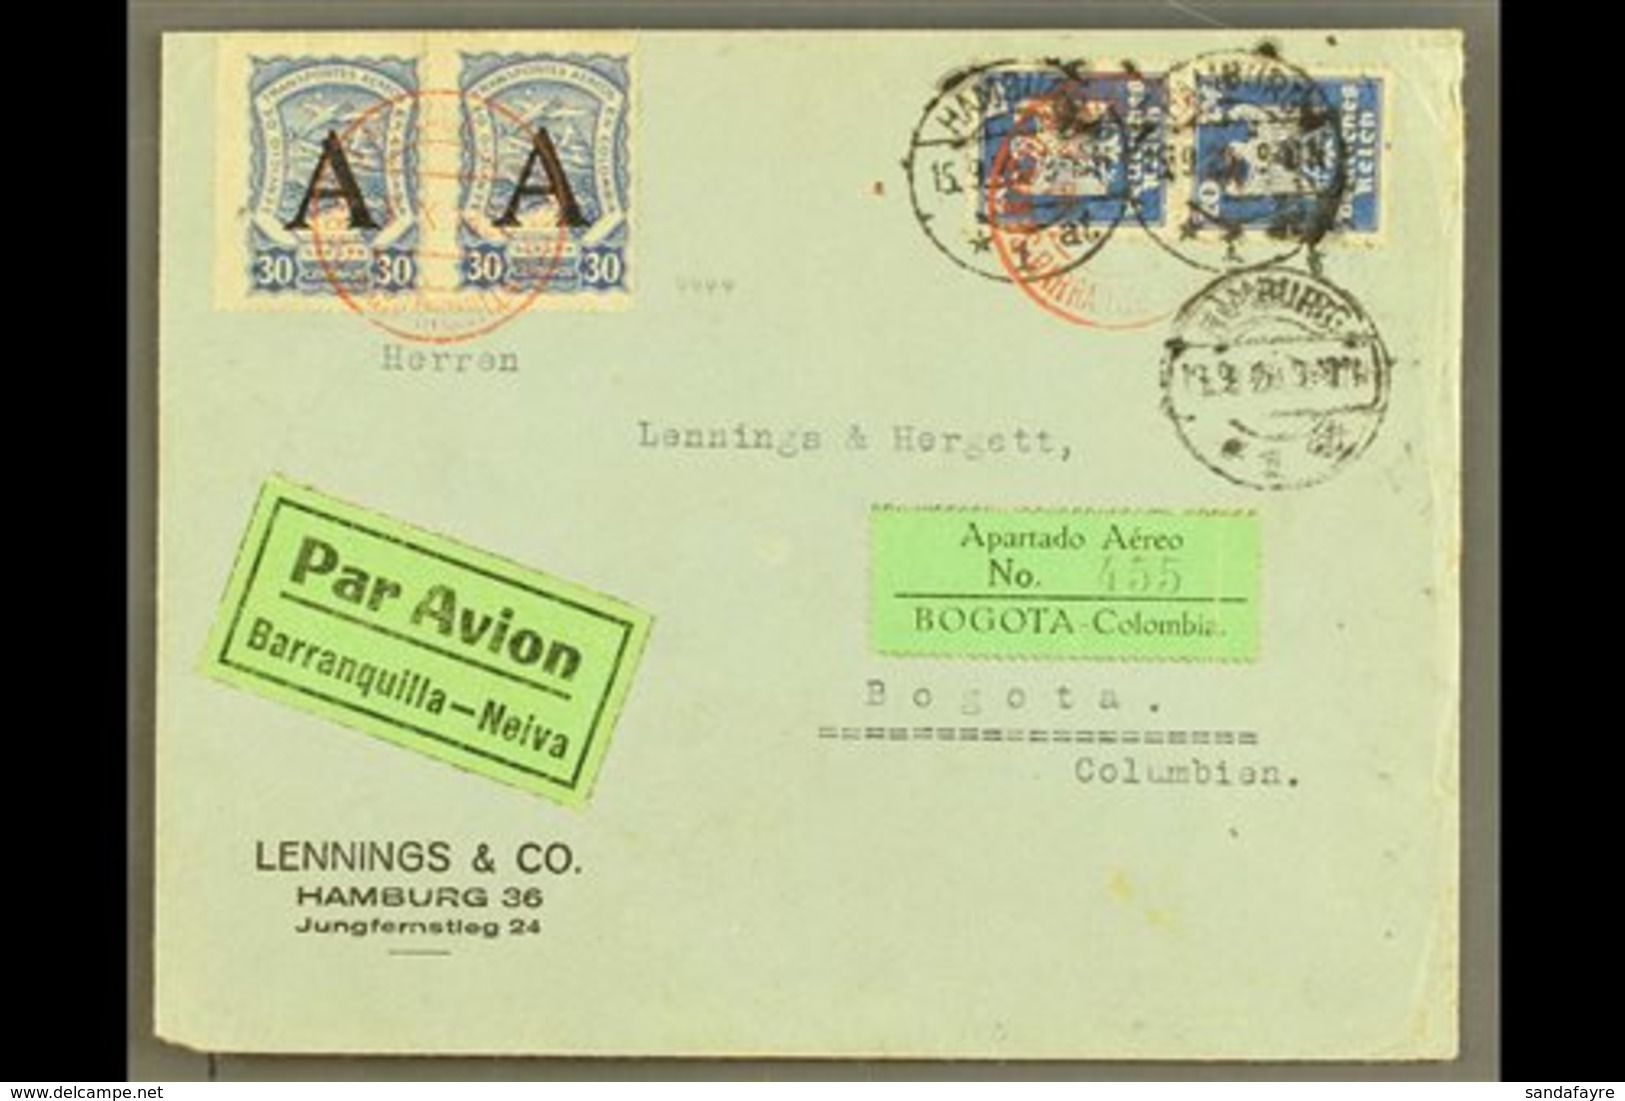 SCADTA  1925 (15 Sept) Cover From Germany To Bogota Bearing 20pf Pair Tied By Hamburg Cds's Plus SCADTA 1923 30c Horizon - Colombia